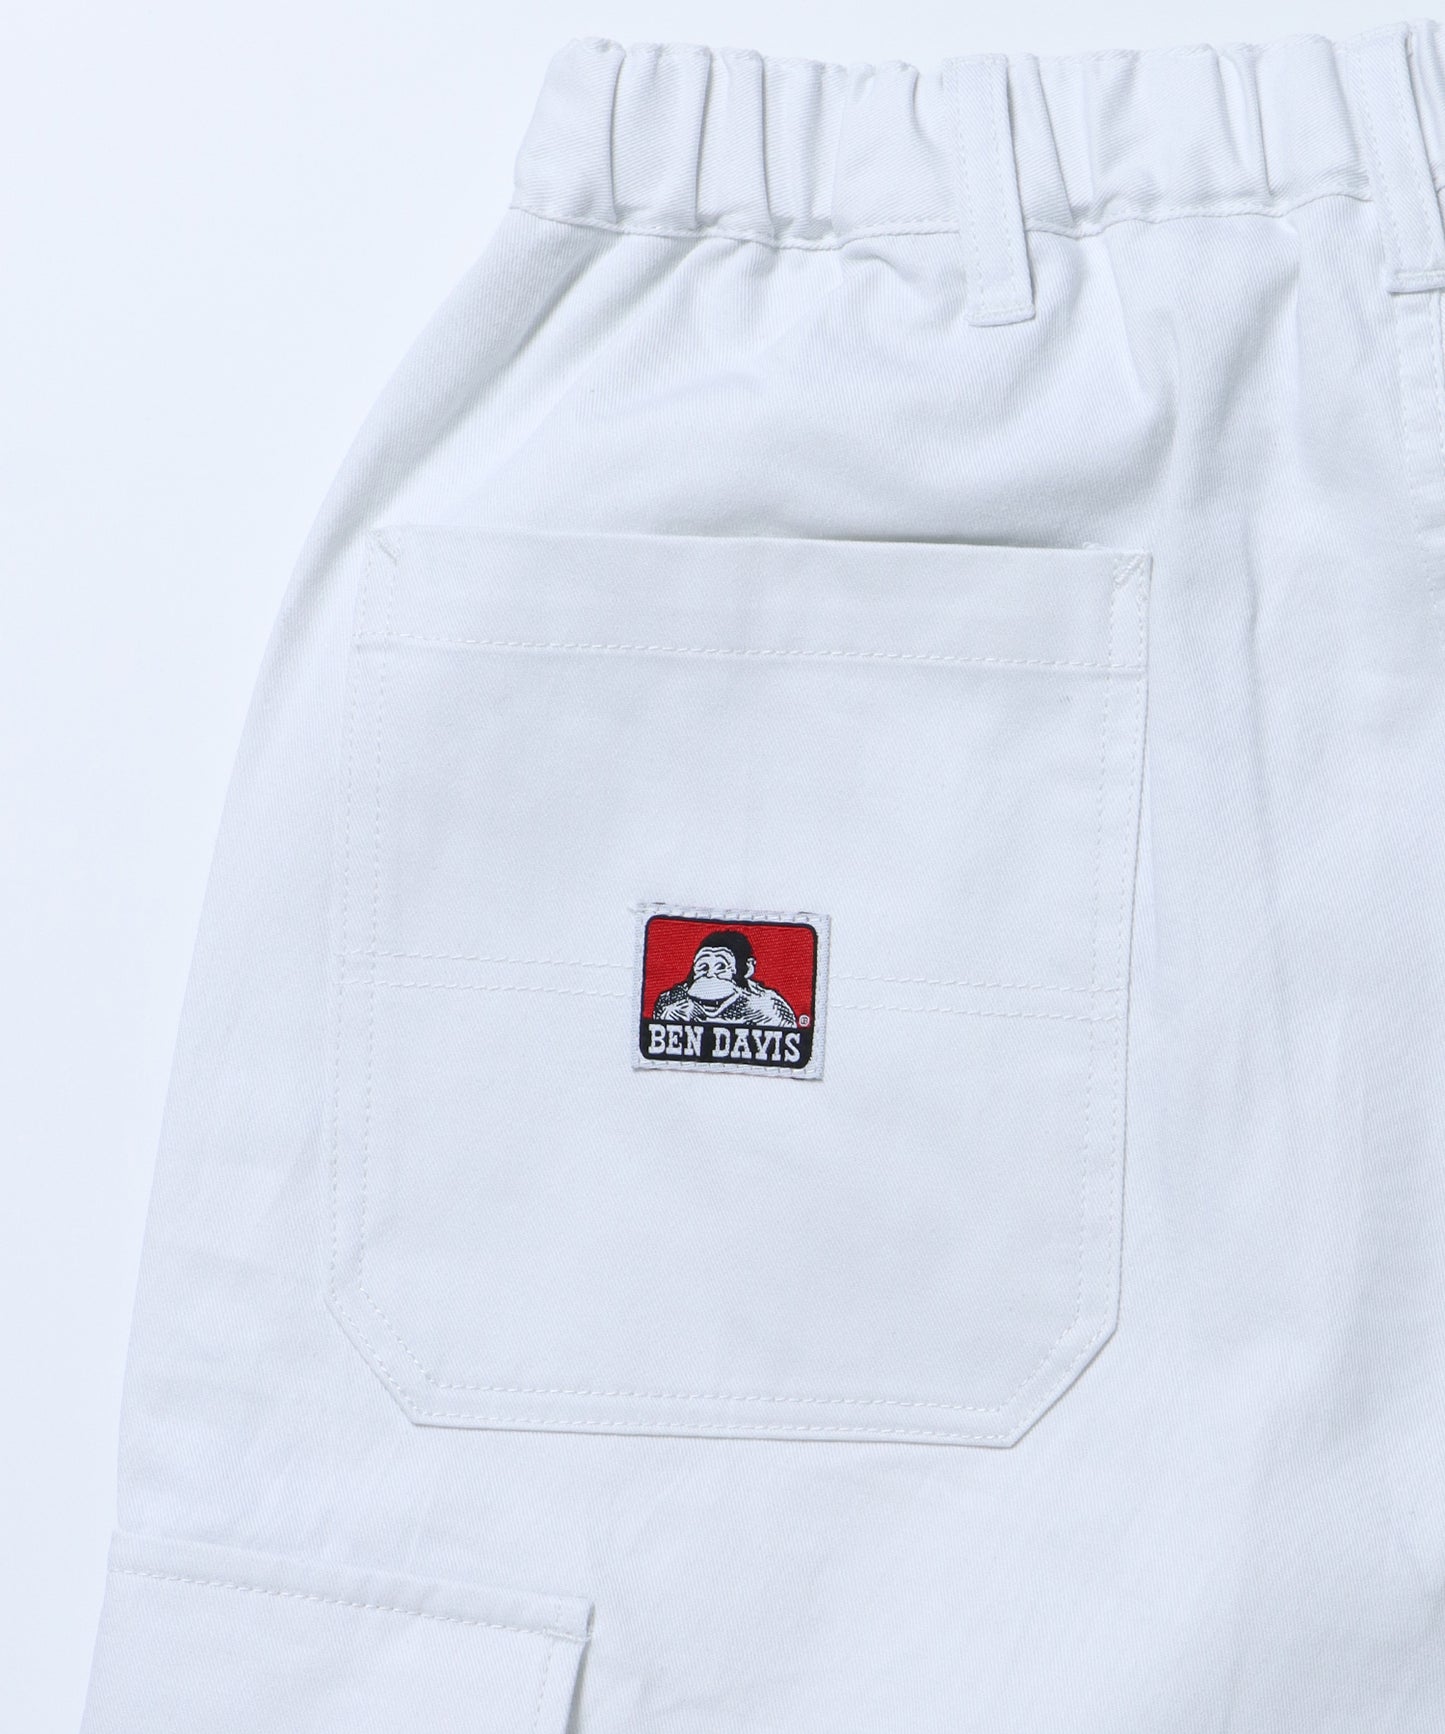 SNOW WORKERS PANTS / ルーズシルエット ワーク カラースノーパンツ 柄81